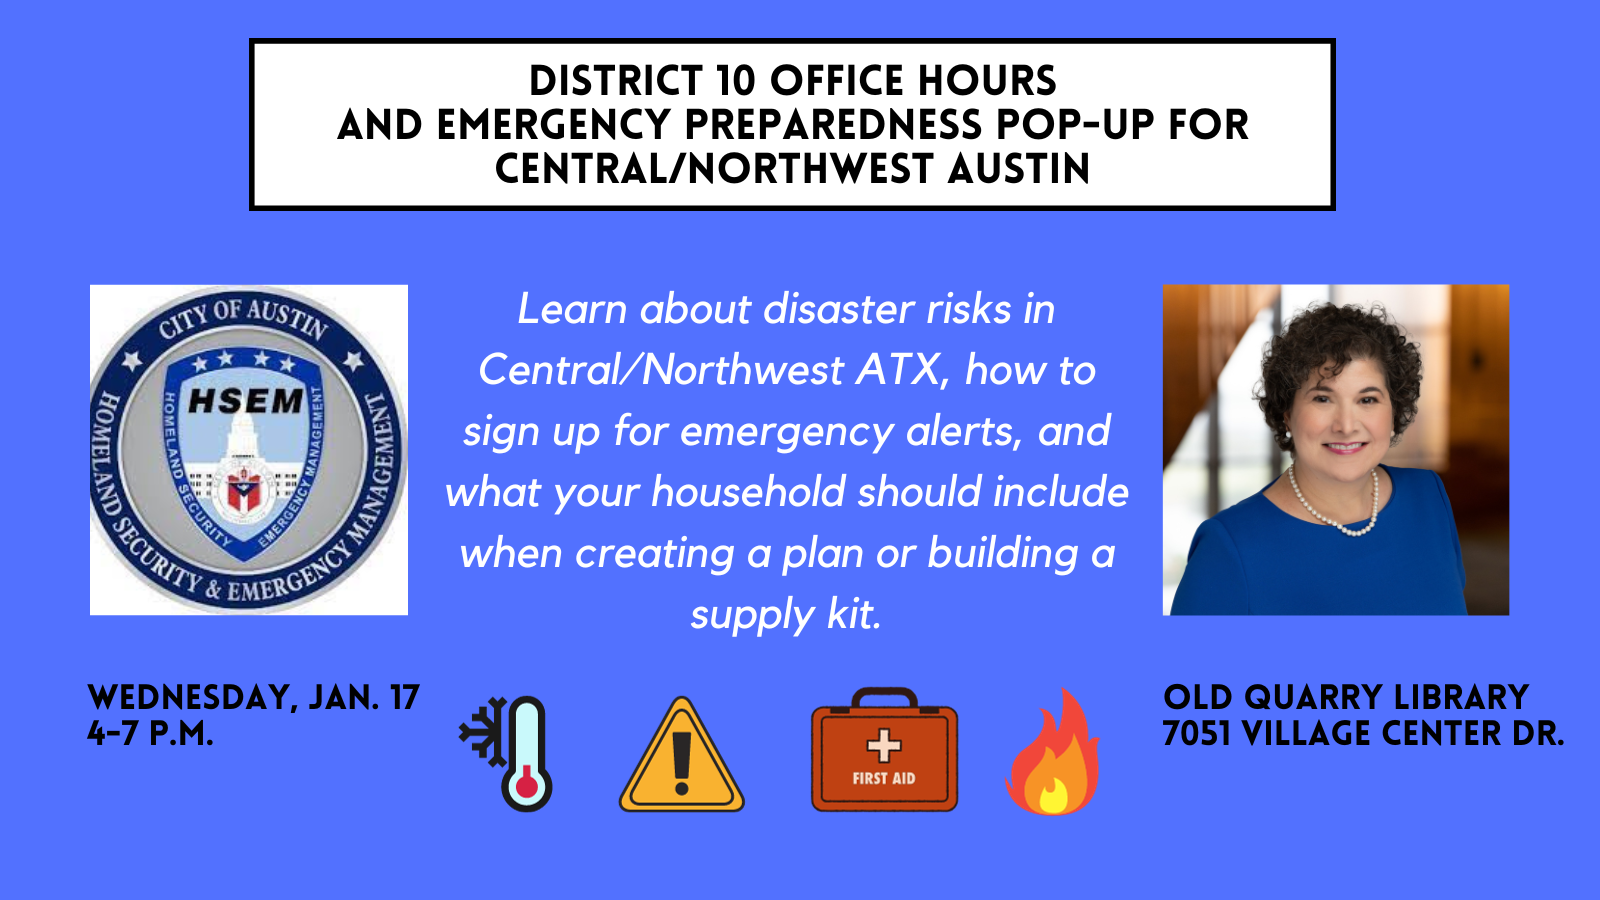 d10 office hours and emergency preparedness pop-up: jan 17, 4-7, old quarry library